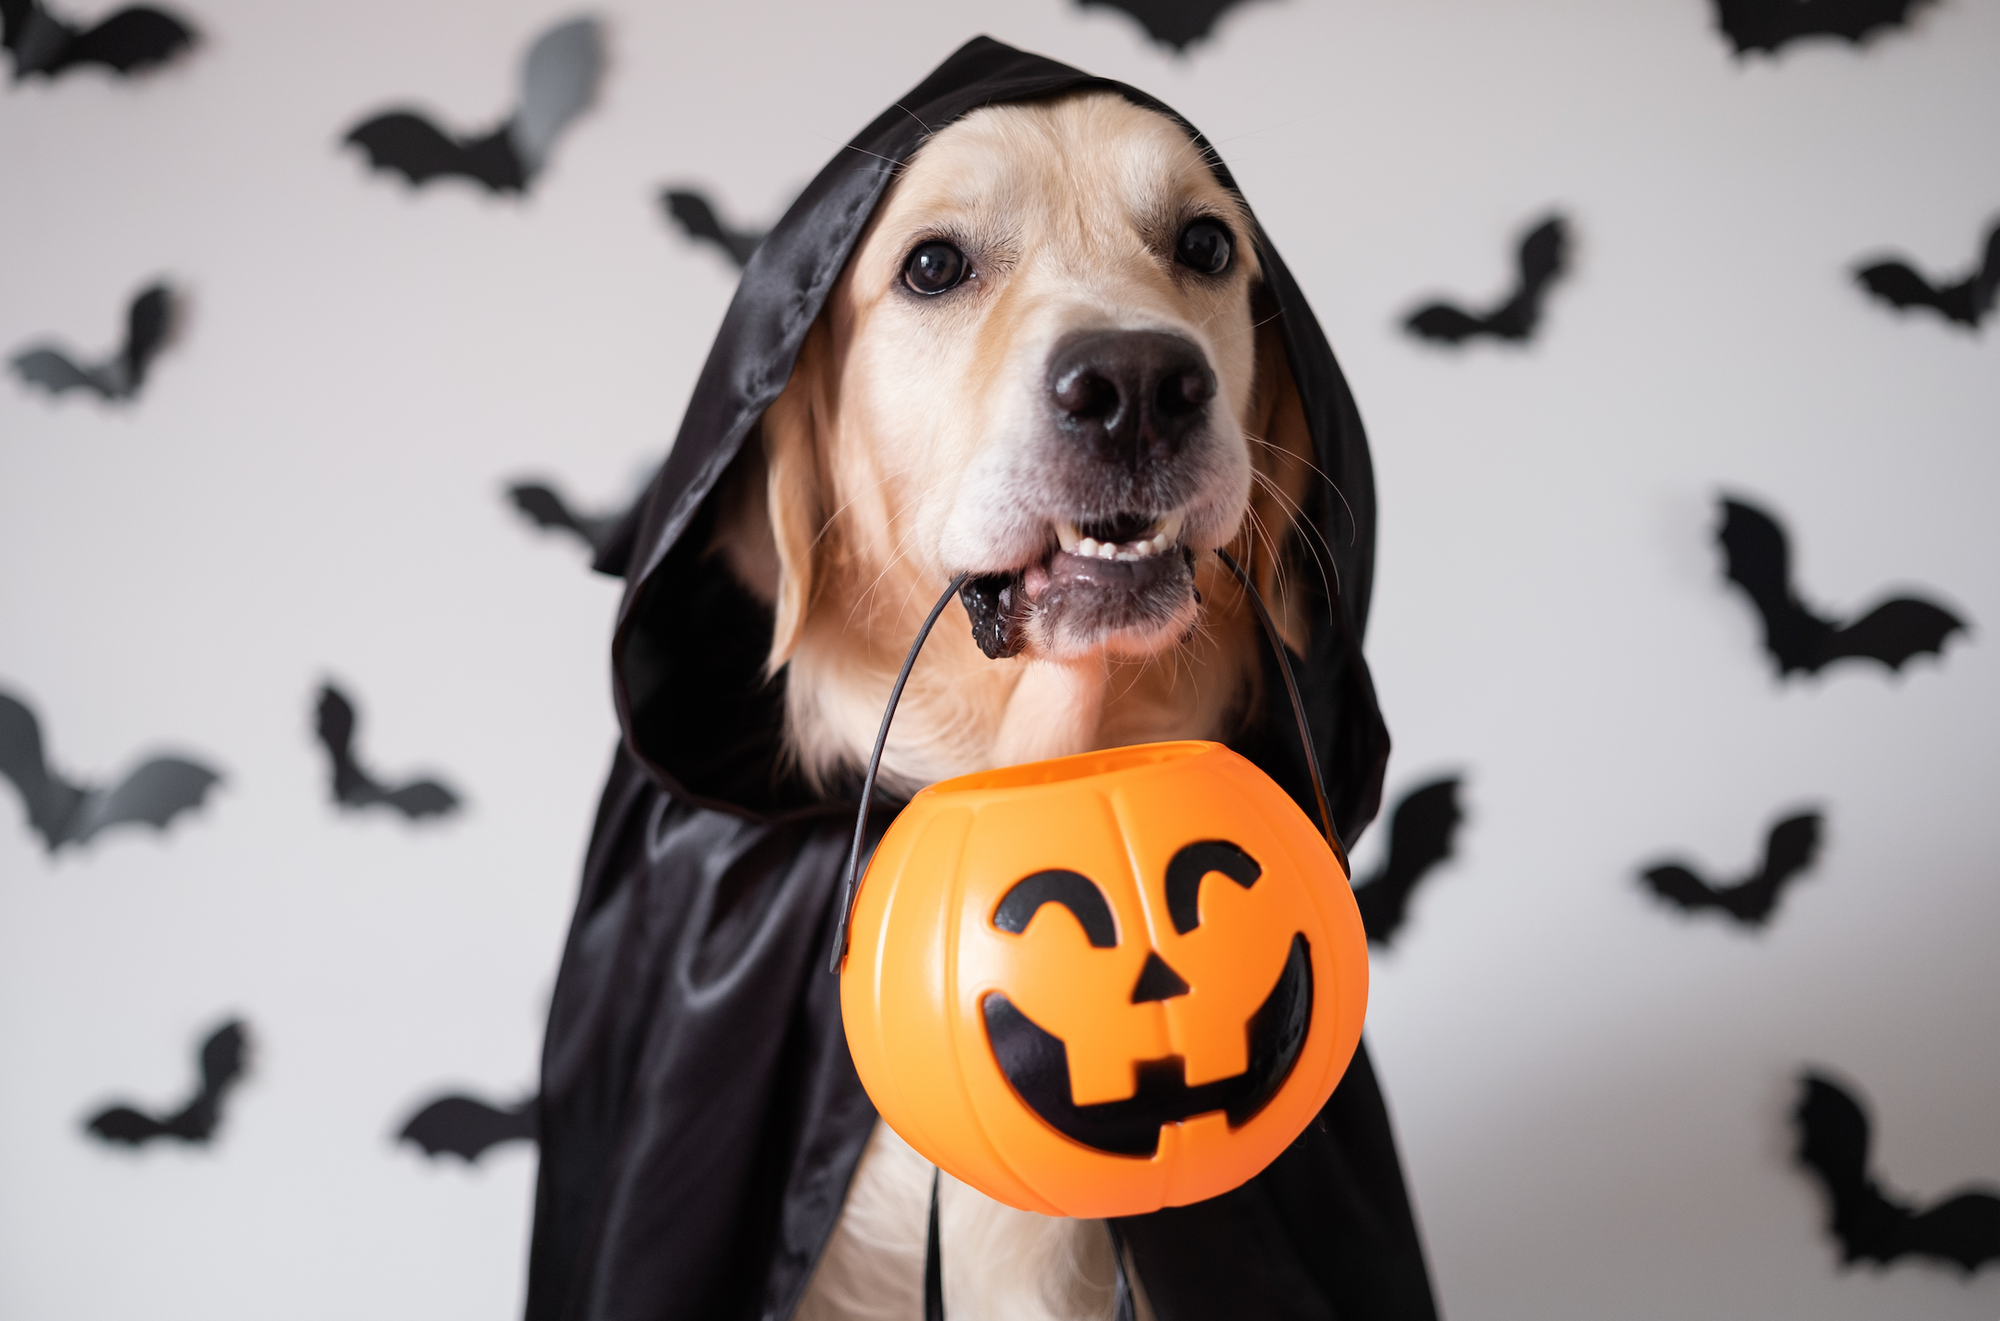 A dog in a black cape holding a pumpkin, with a close-up of an eye and a bat shadow in the background.